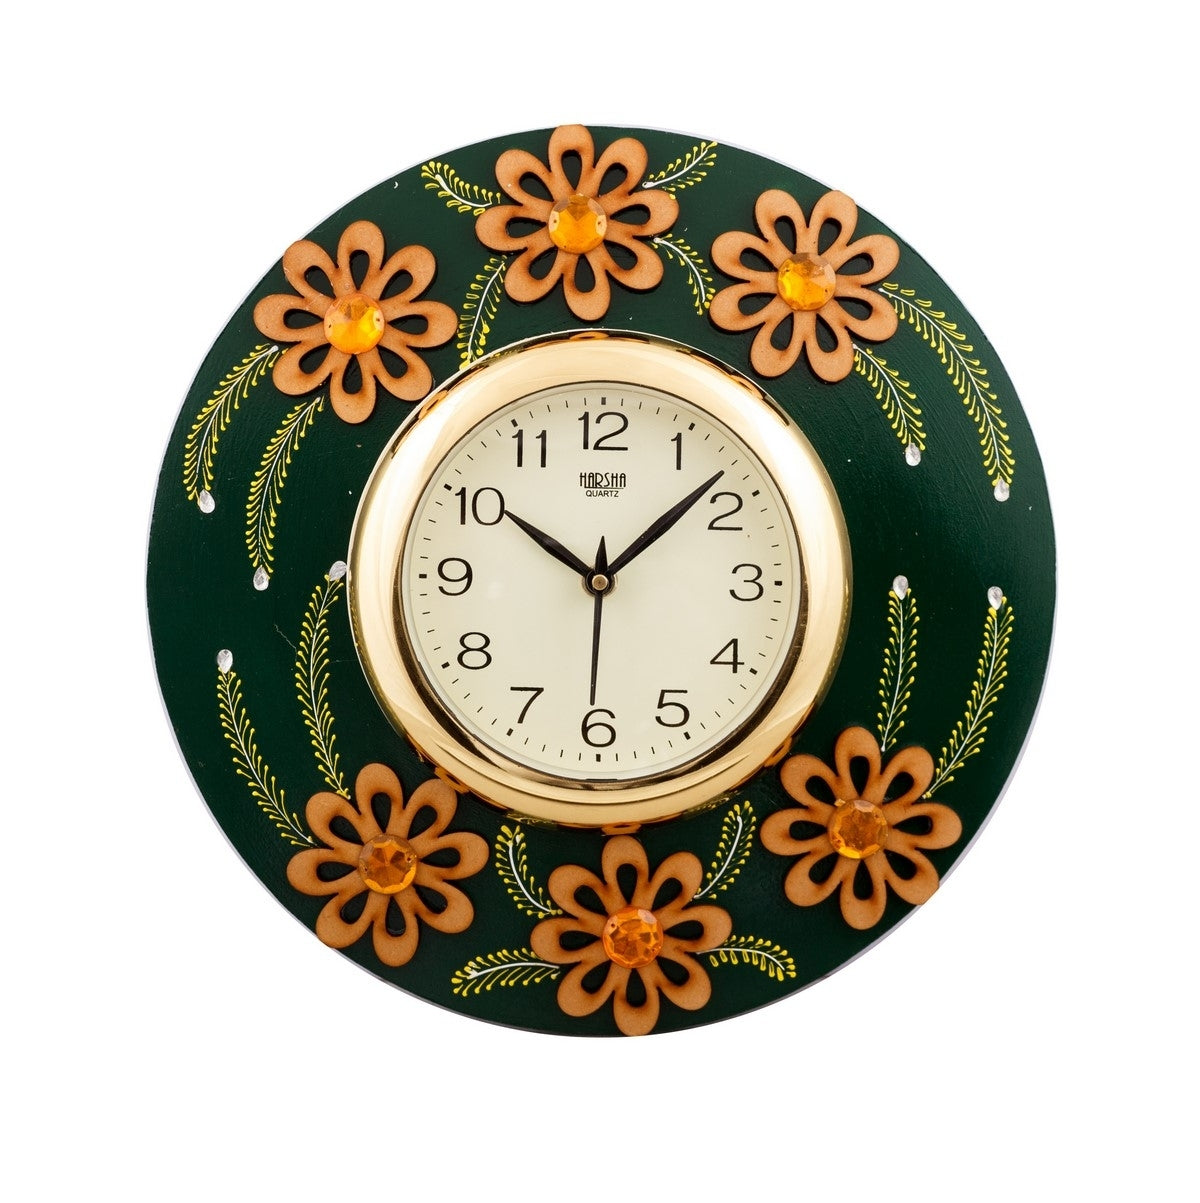 Decorative Fine Crafted Papier-Mache Wooden Handcrafted Wall Clock